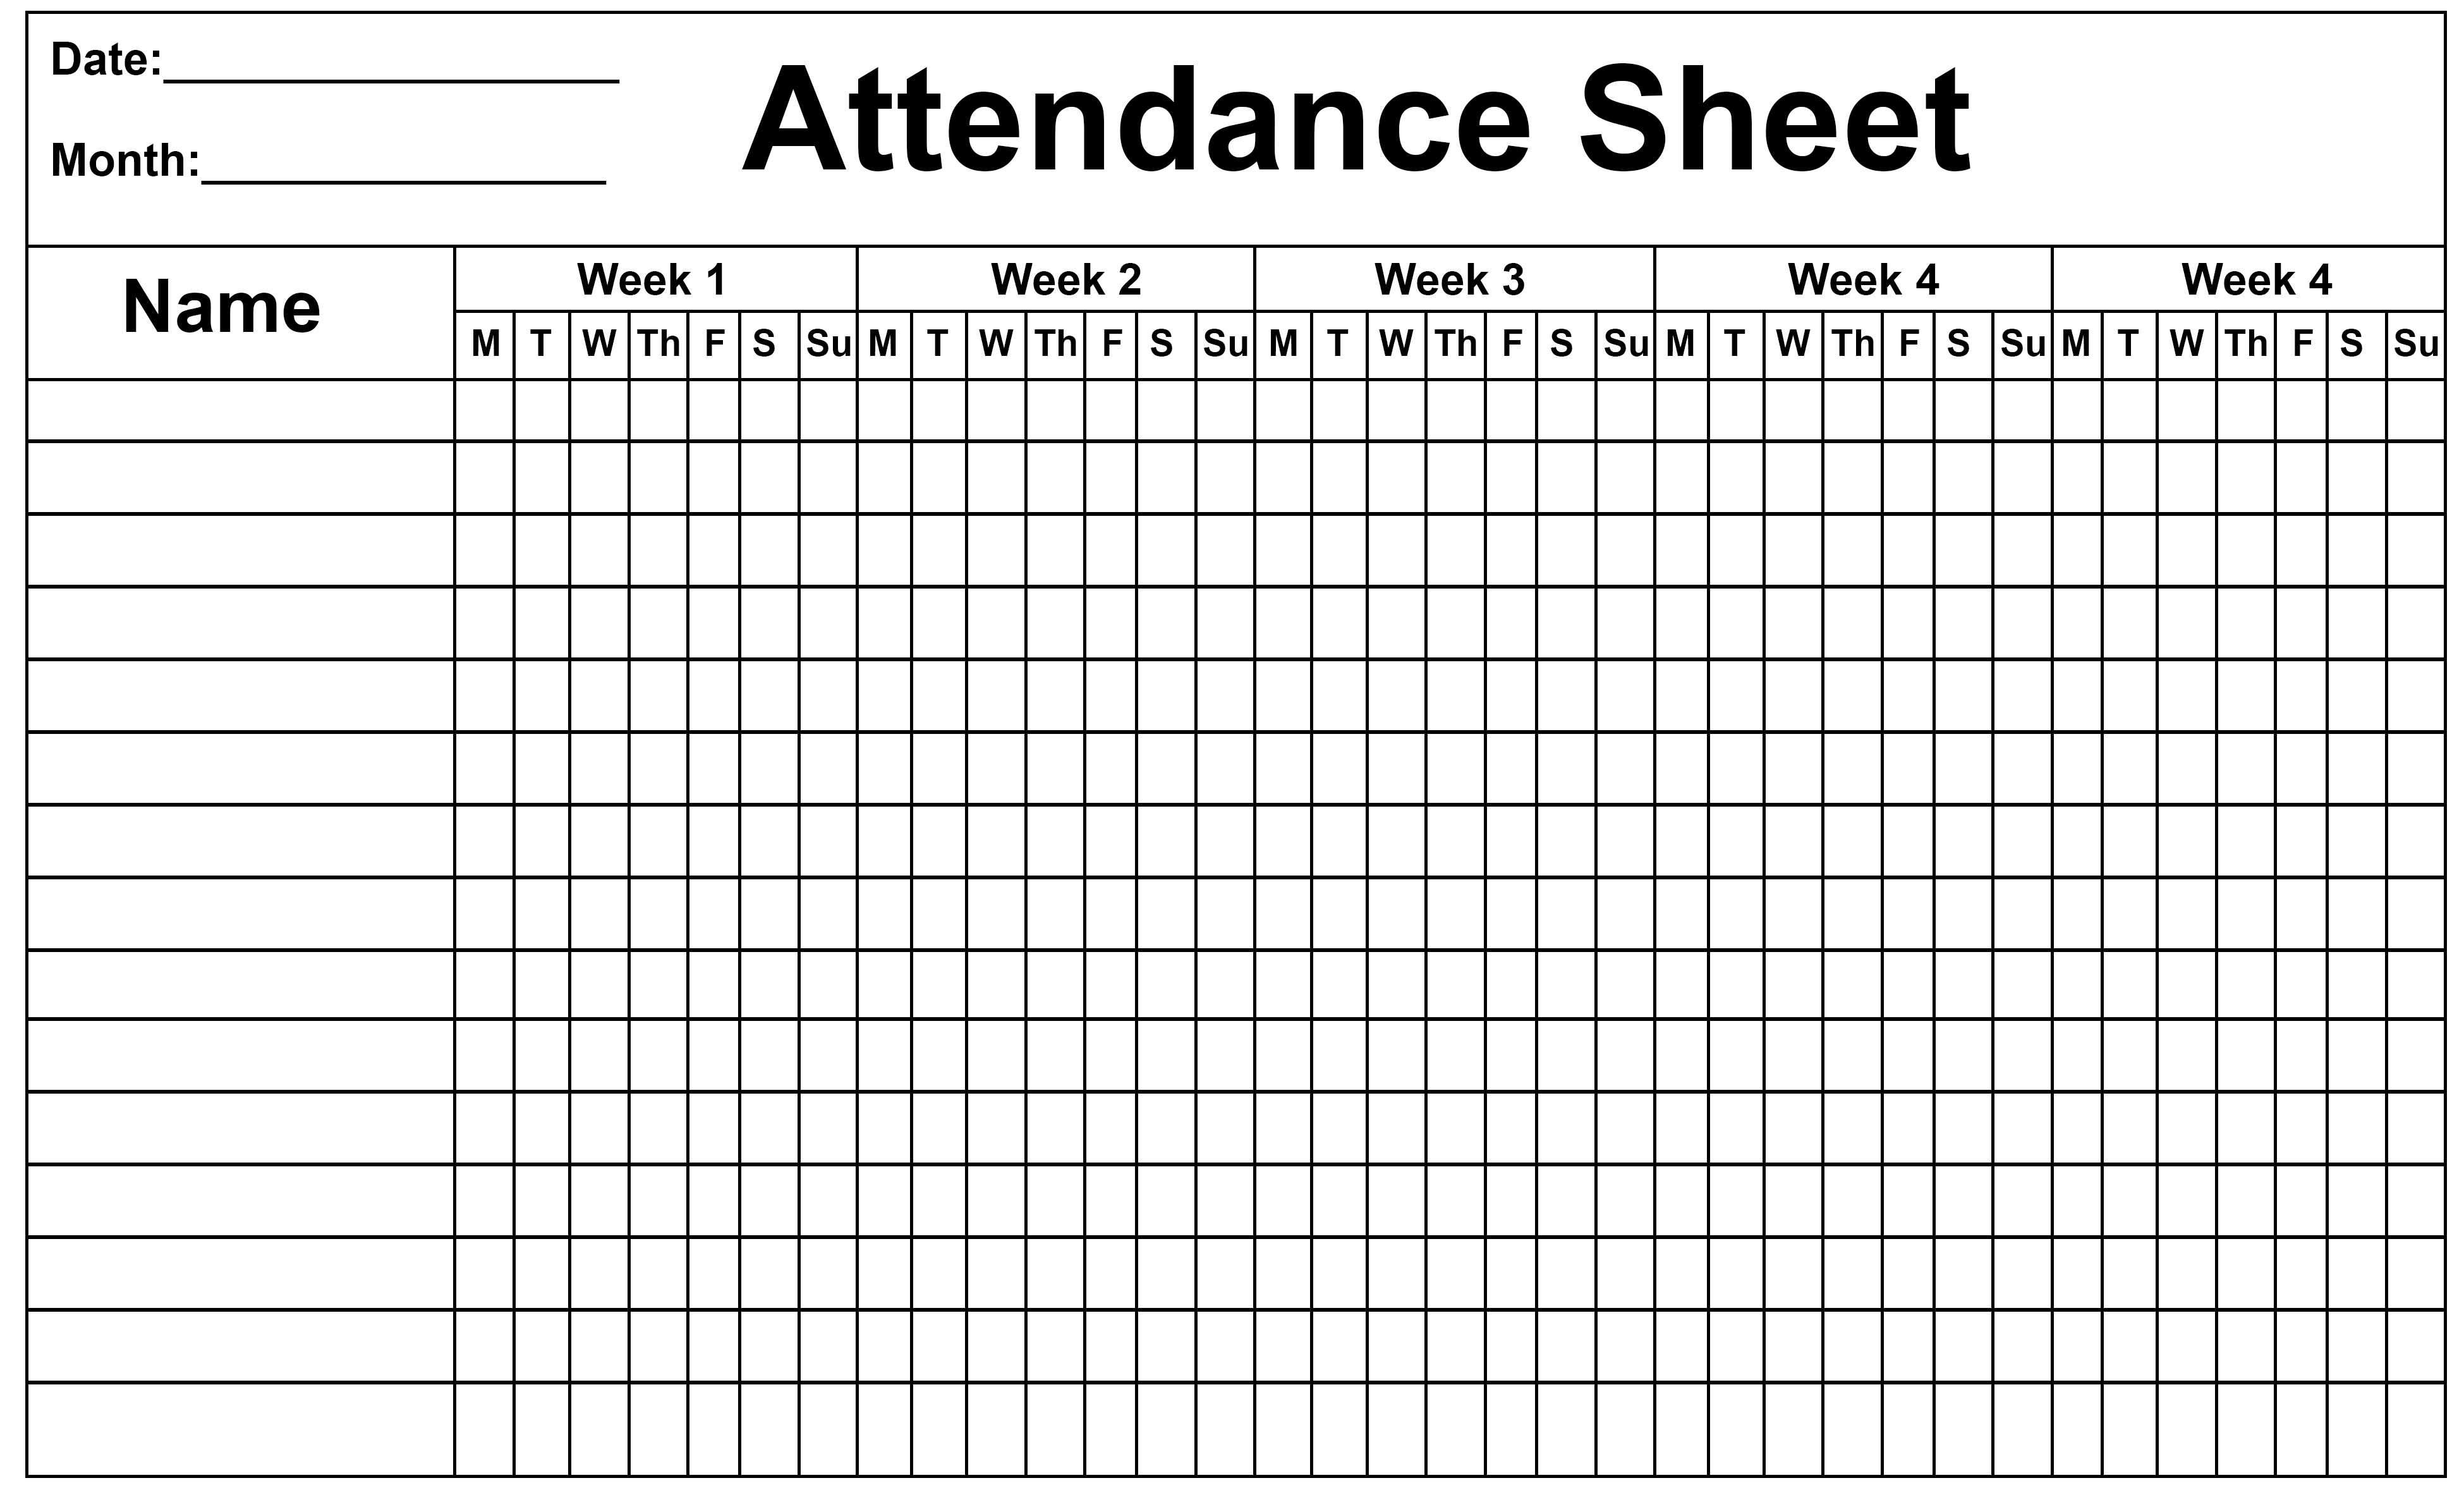 Daily/Monthly Employee Attendance Sheet Template Free | HowToWiki